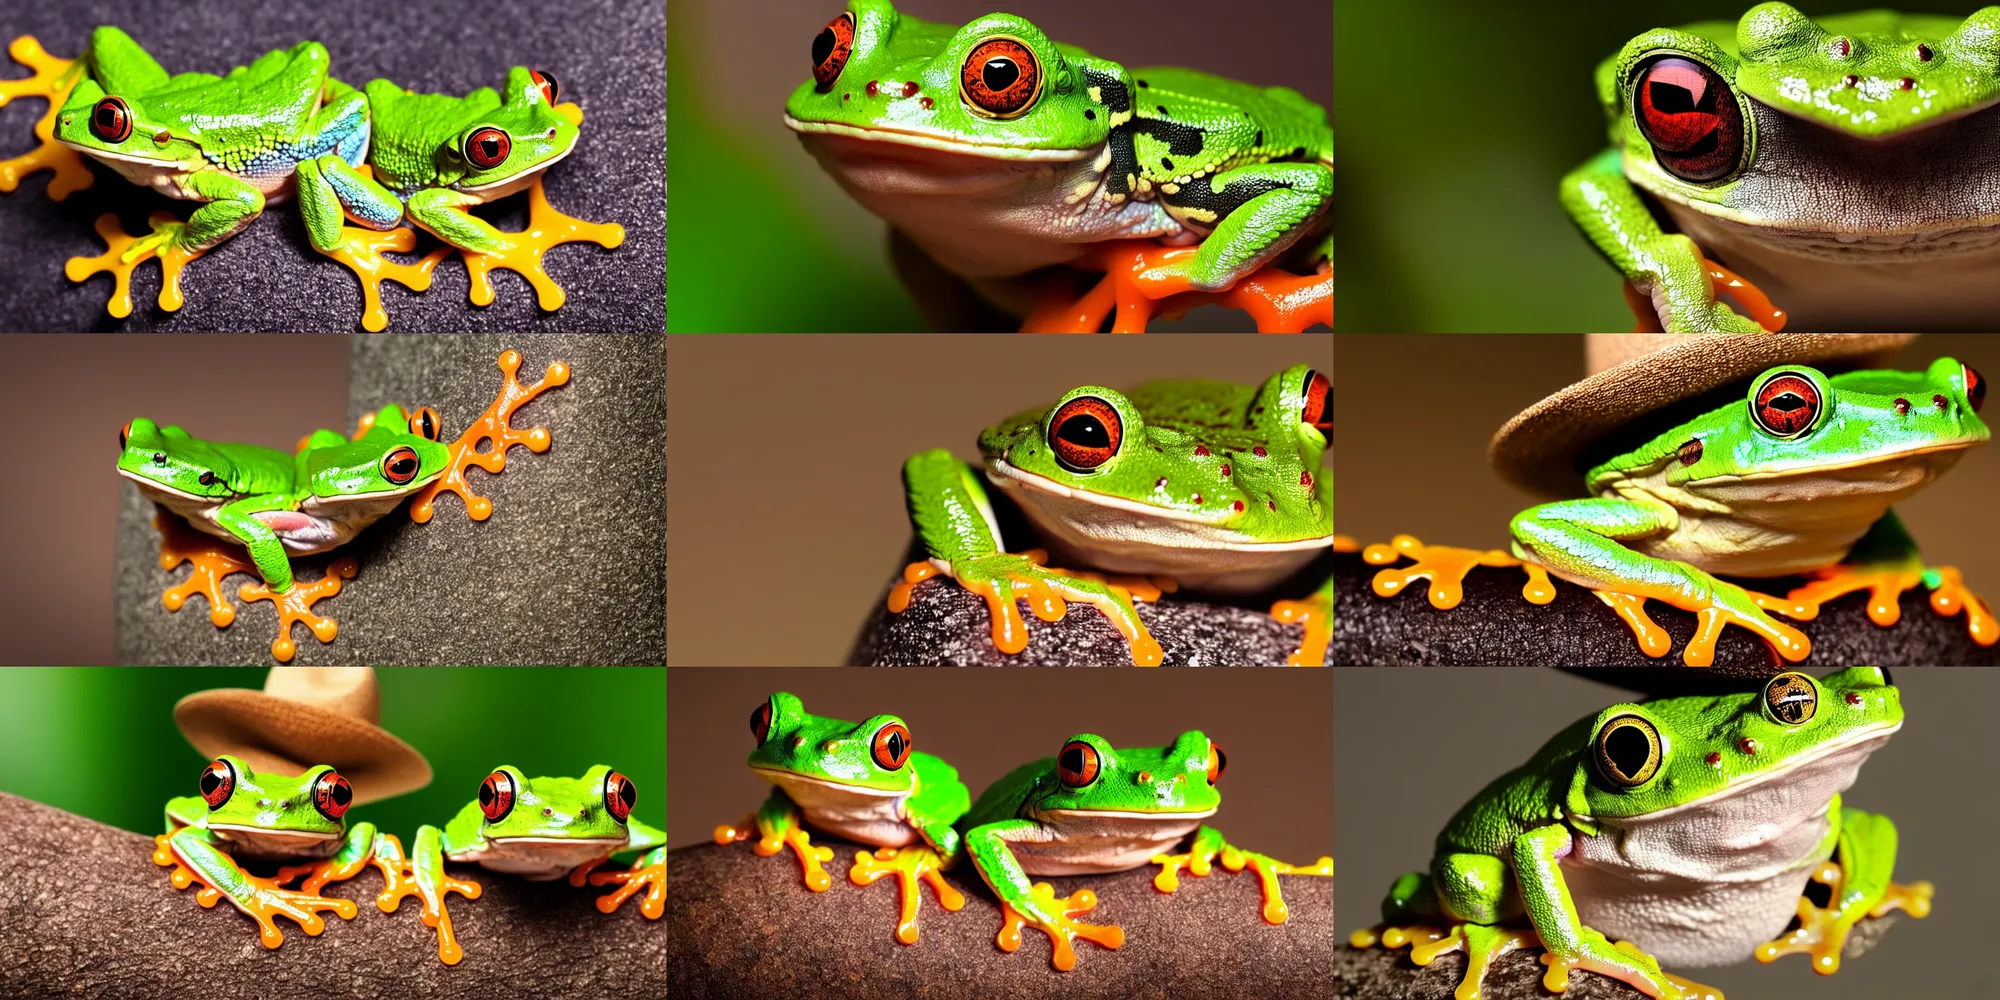 Prompt: an amazon tree frog wearing a small cowboy hat, a macro photograph, shutterstock contest winner, uhd image, shiny eyes, macro photography